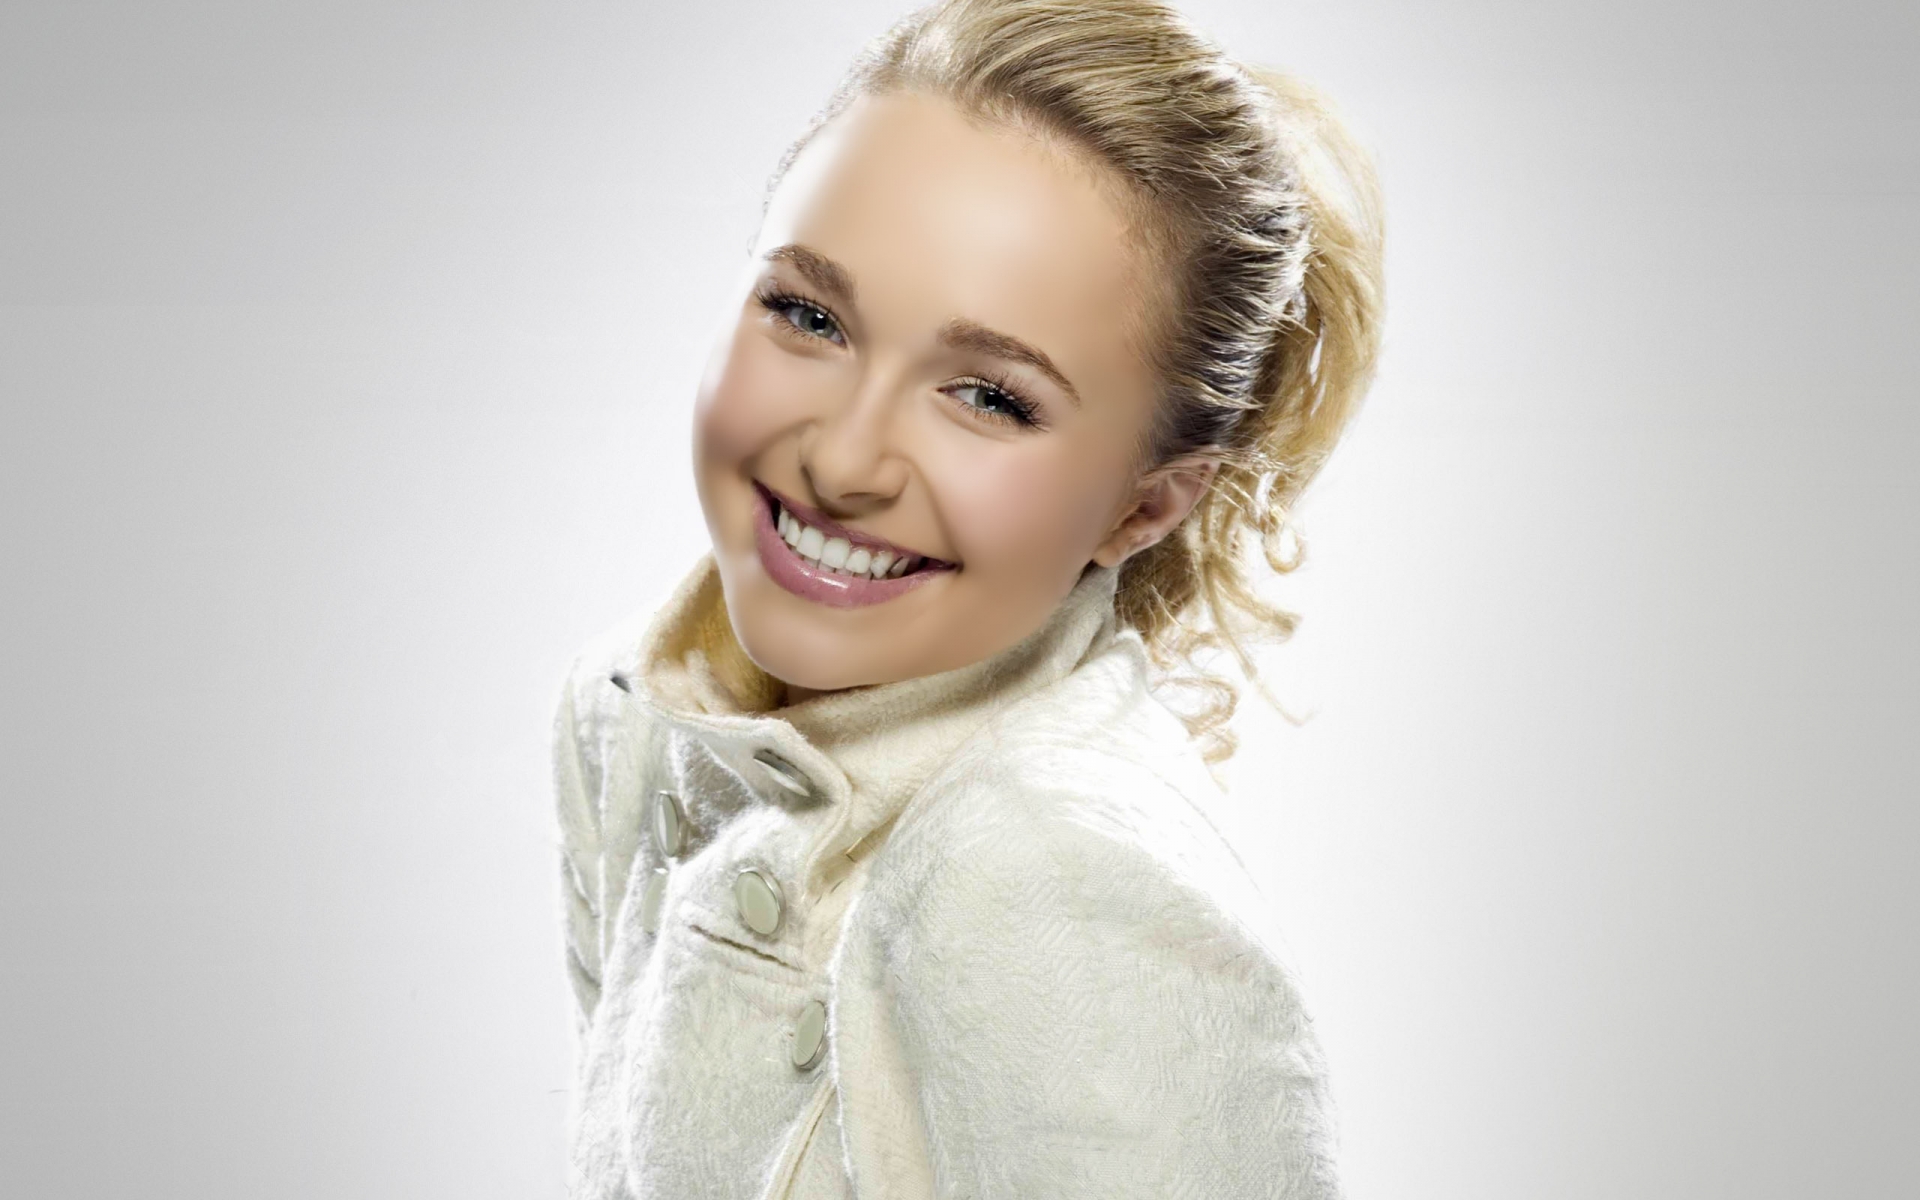 Hayden Panettiere Cute Smile for 1920 x 1200 widescreen resolution